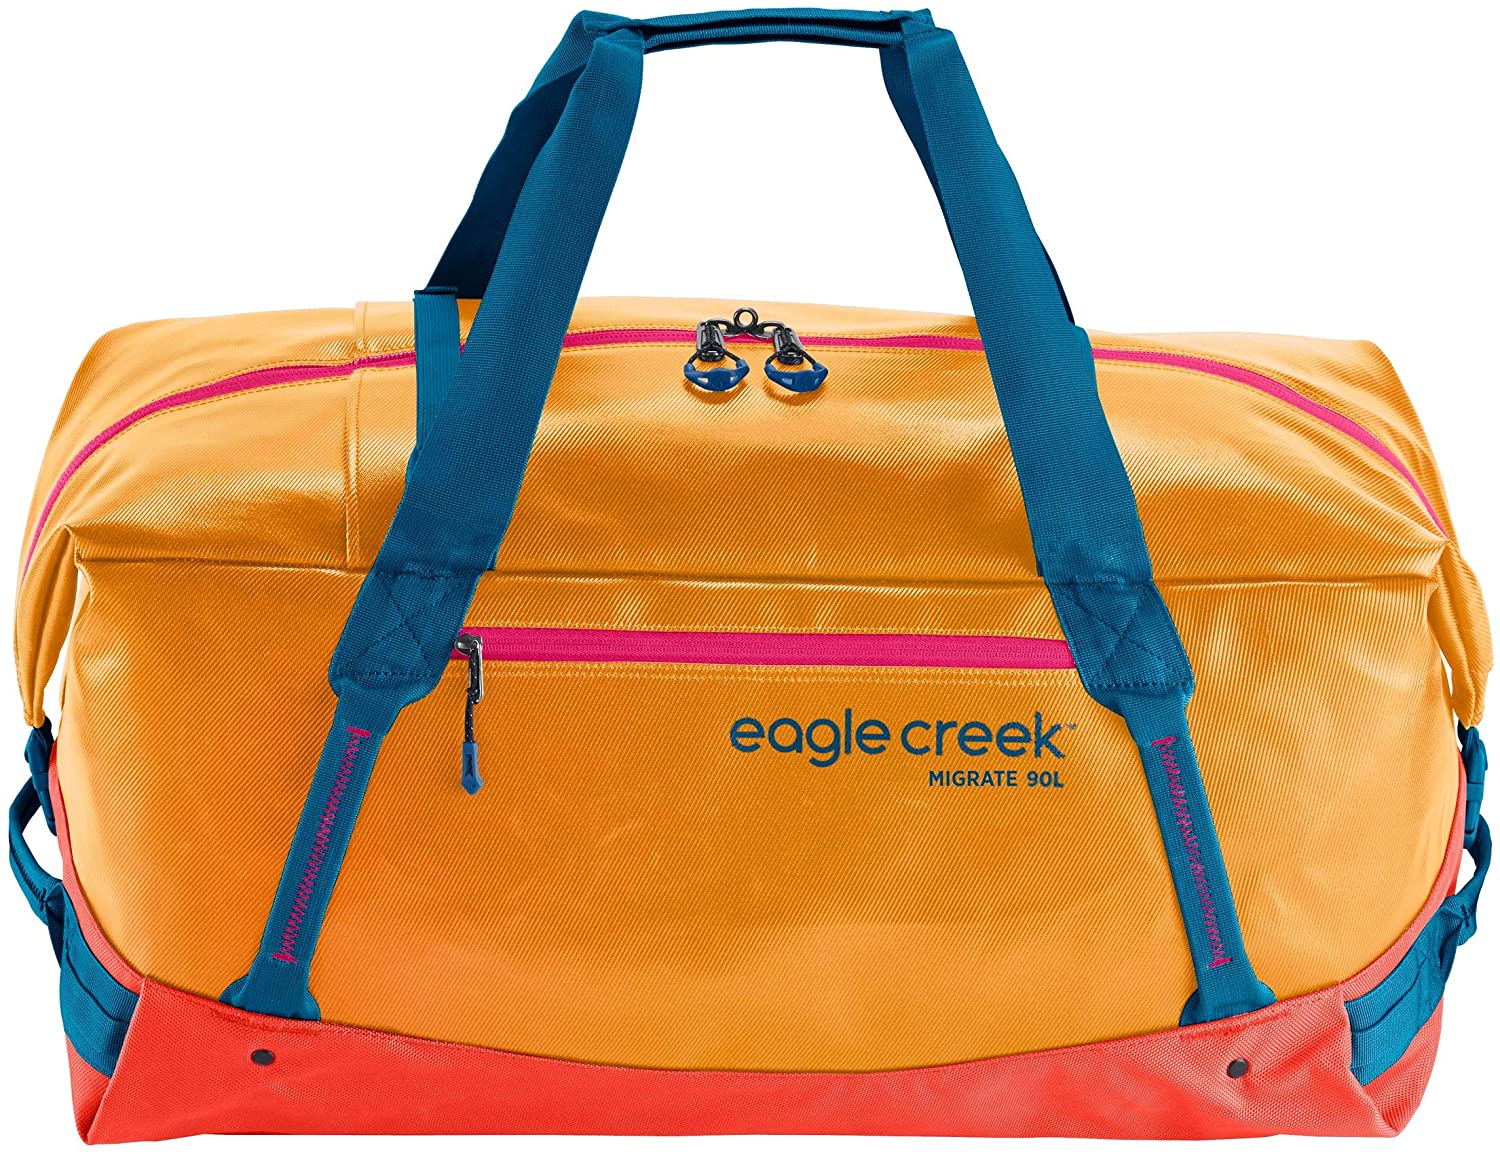 Eagle Creek Migrate Duffel 90 Liters in Sahara Yellow color from the front